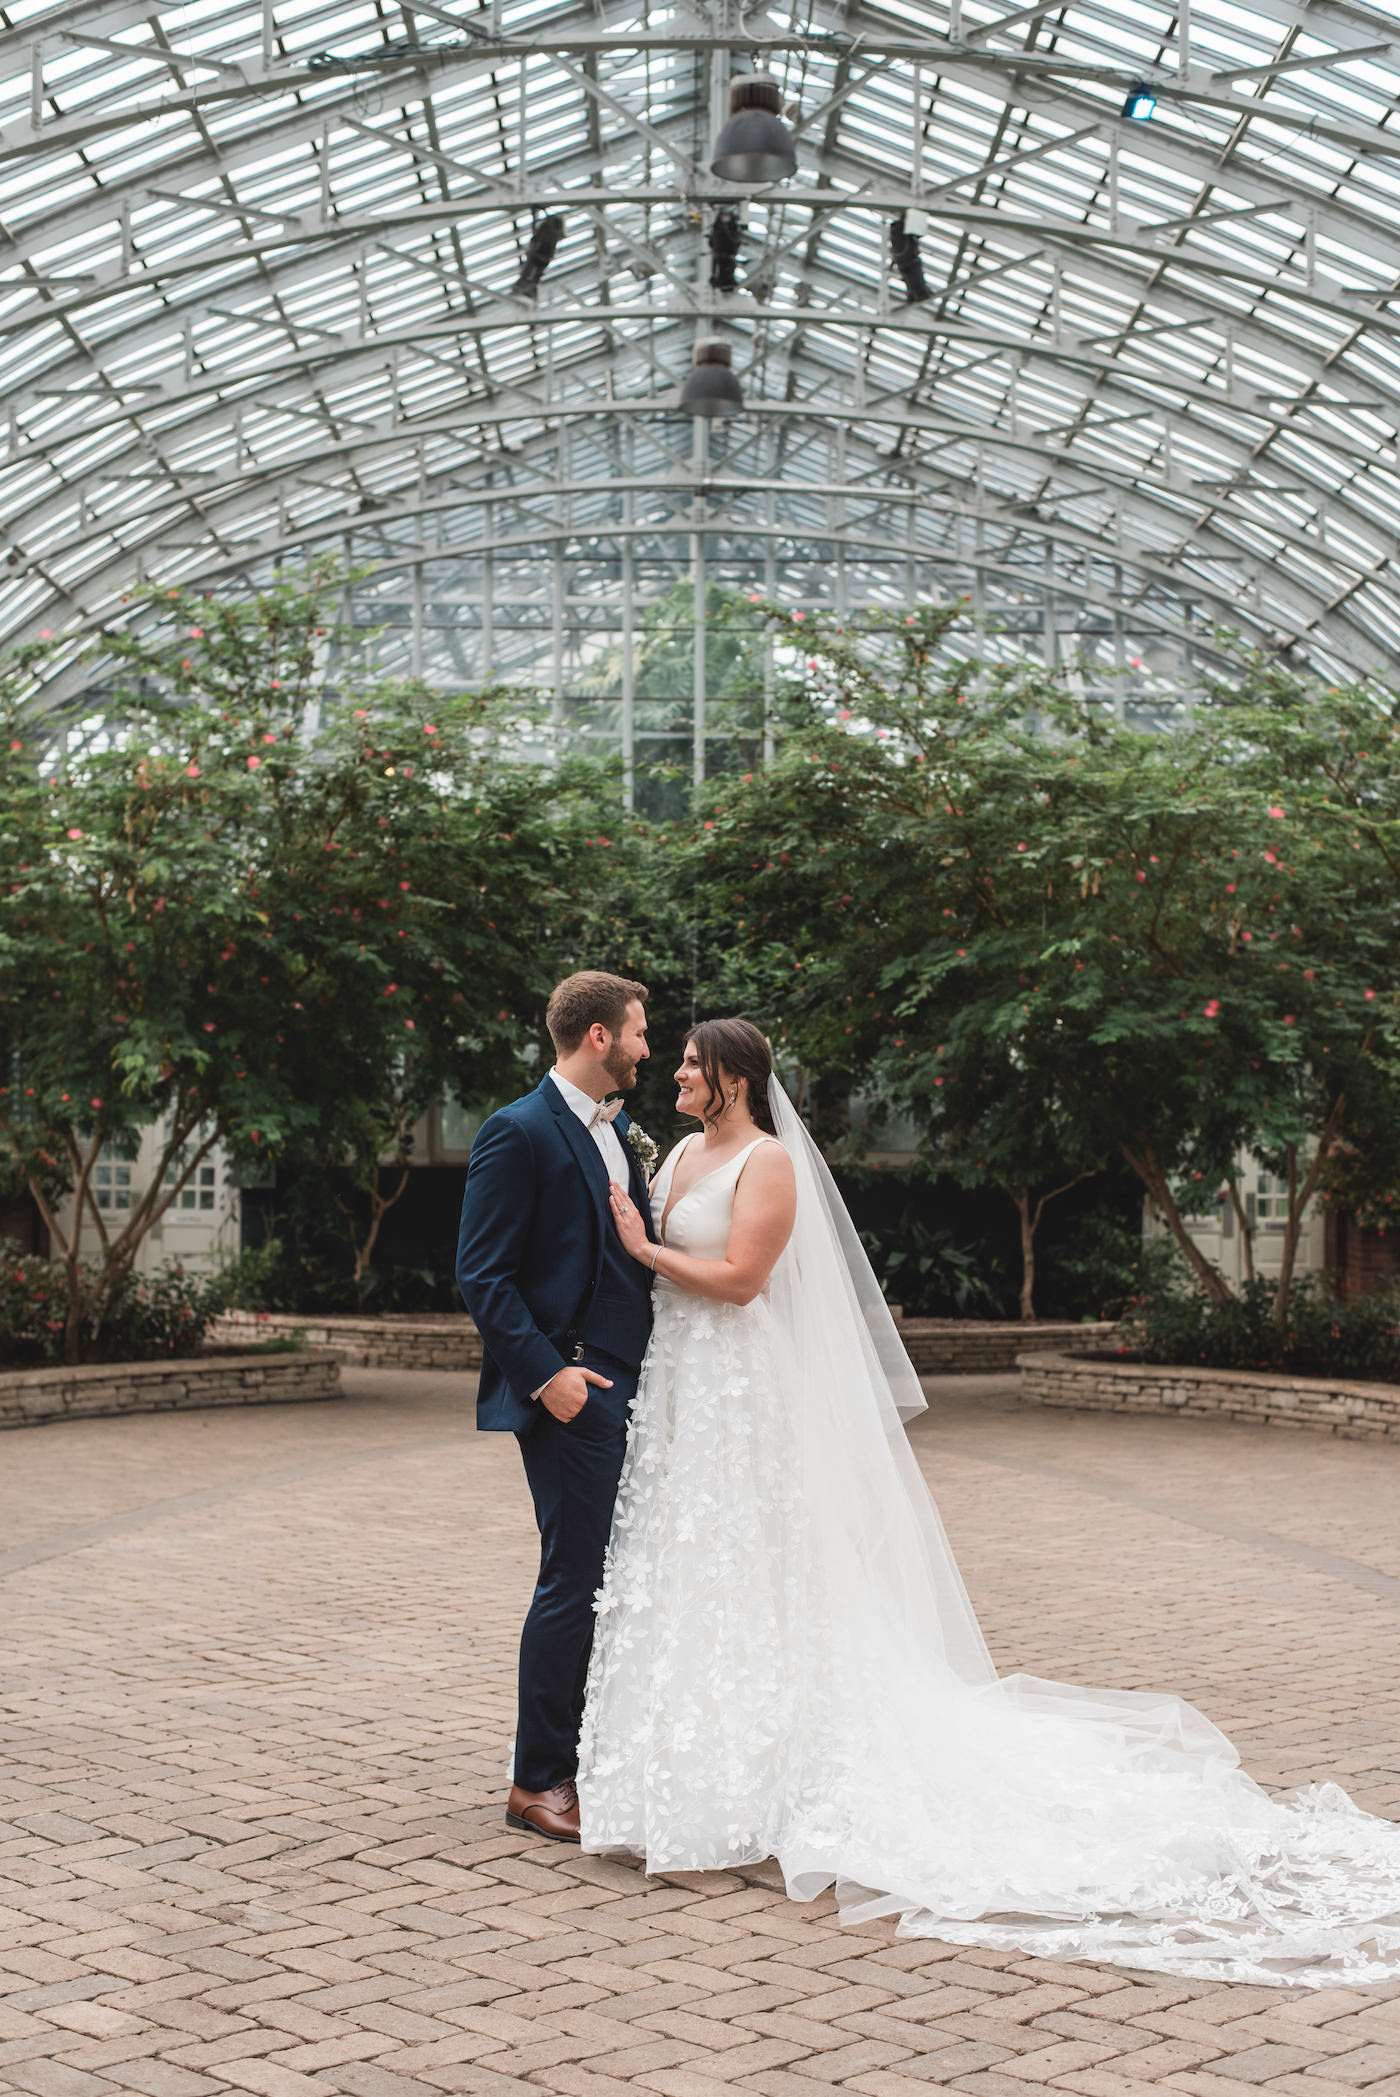 Bride and groom smiling at each other in Garfield Park Conservatory